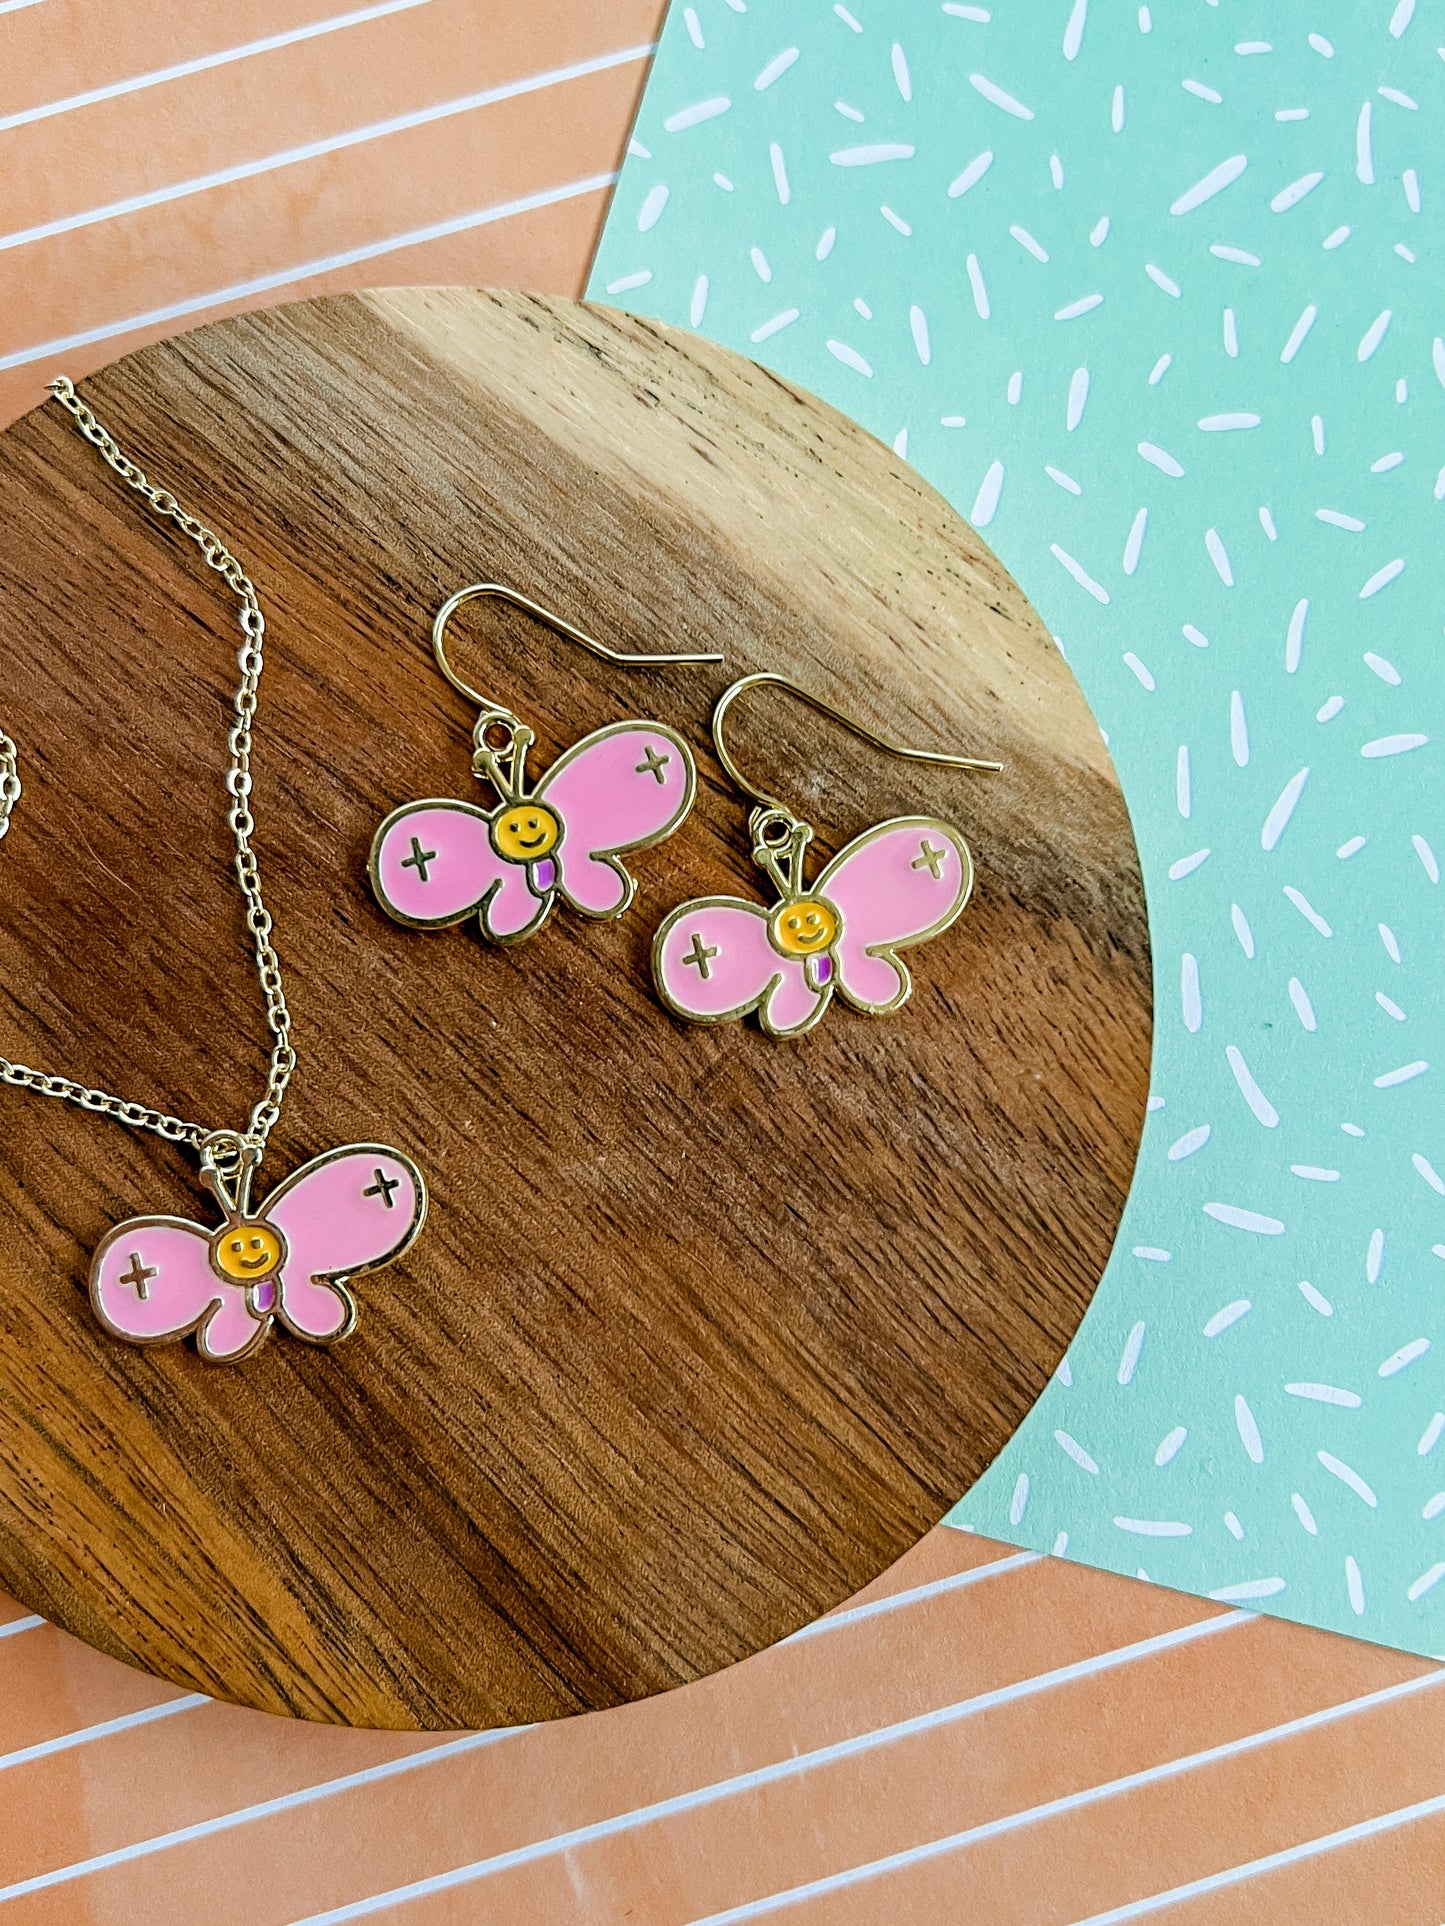 Betty the Butterfly Necklace and Earrings